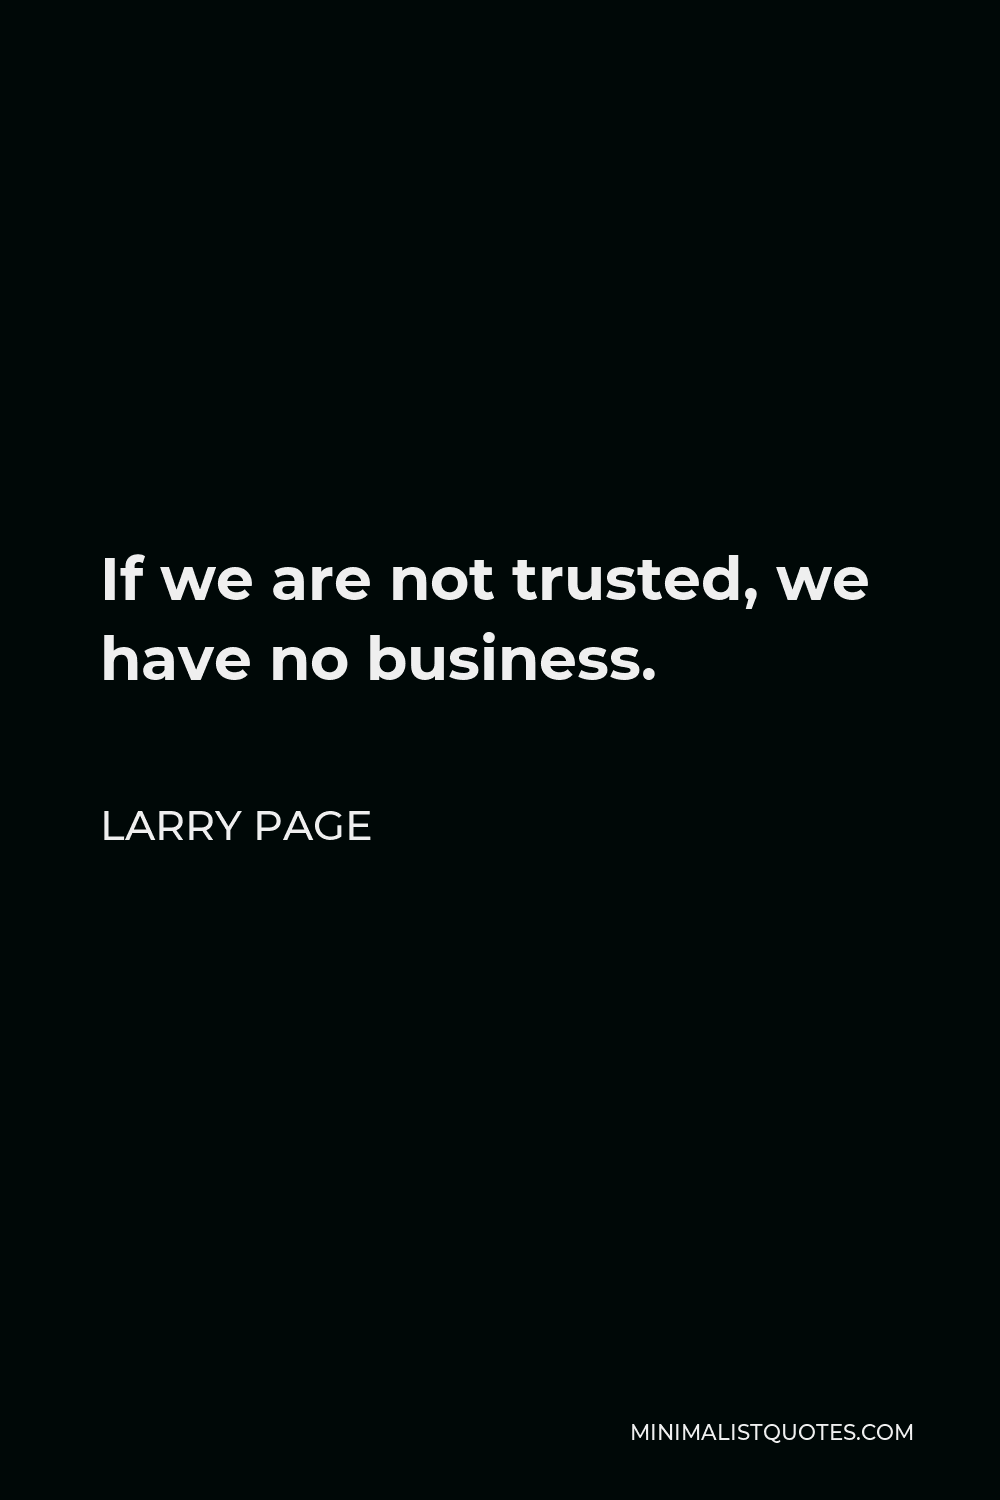 Larry Page Quote - If we are not trusted, we have no business.